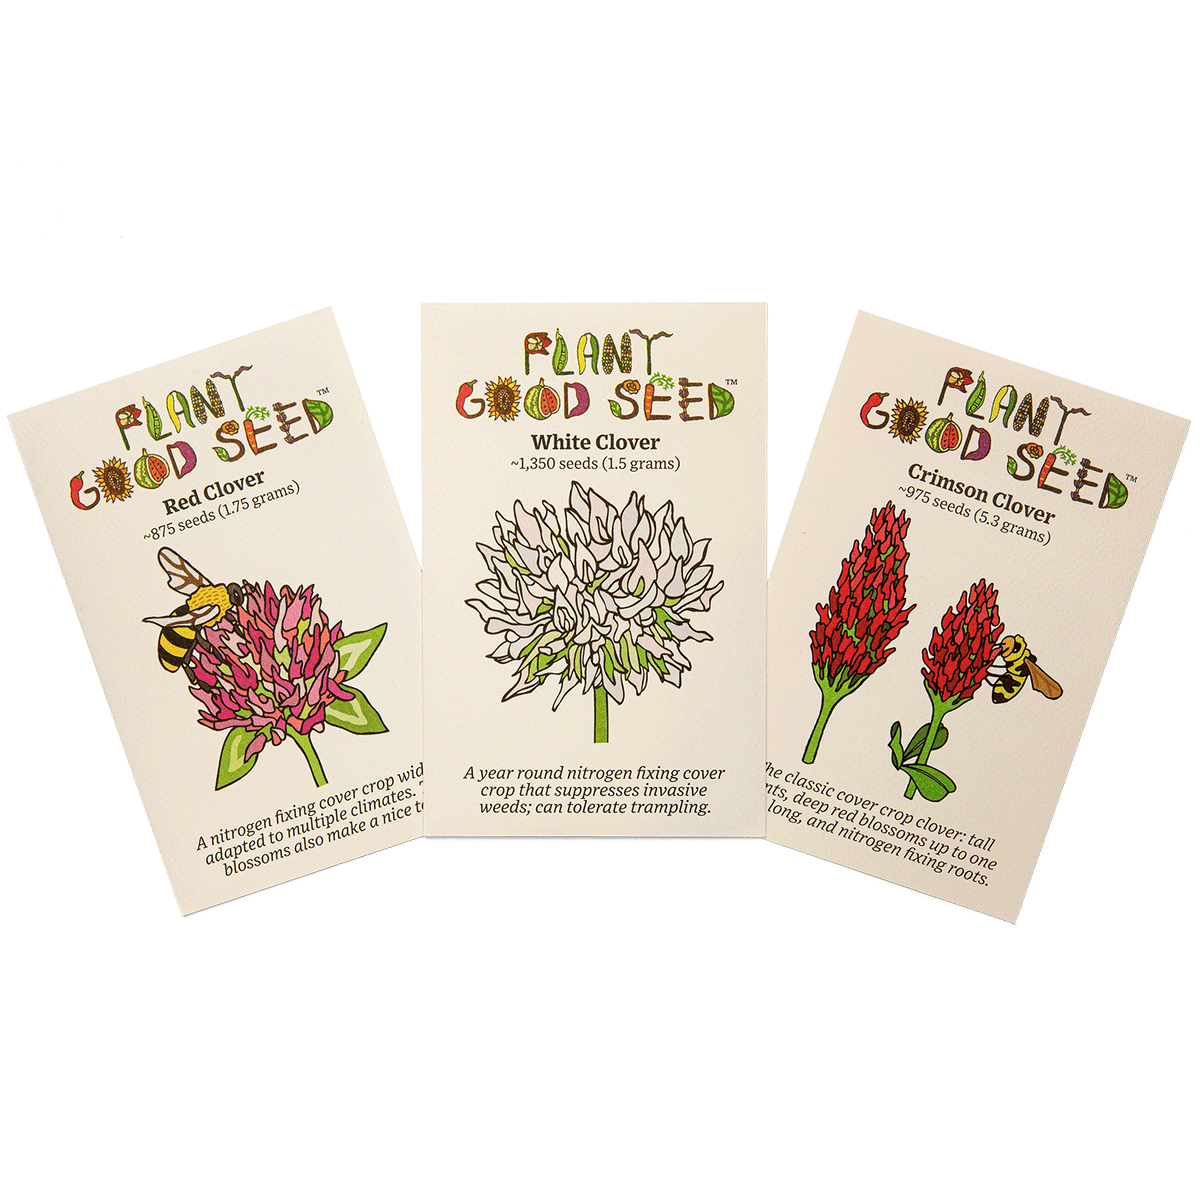 Red Clover White Clover Crimson Clover Seed Packets Certified Organic